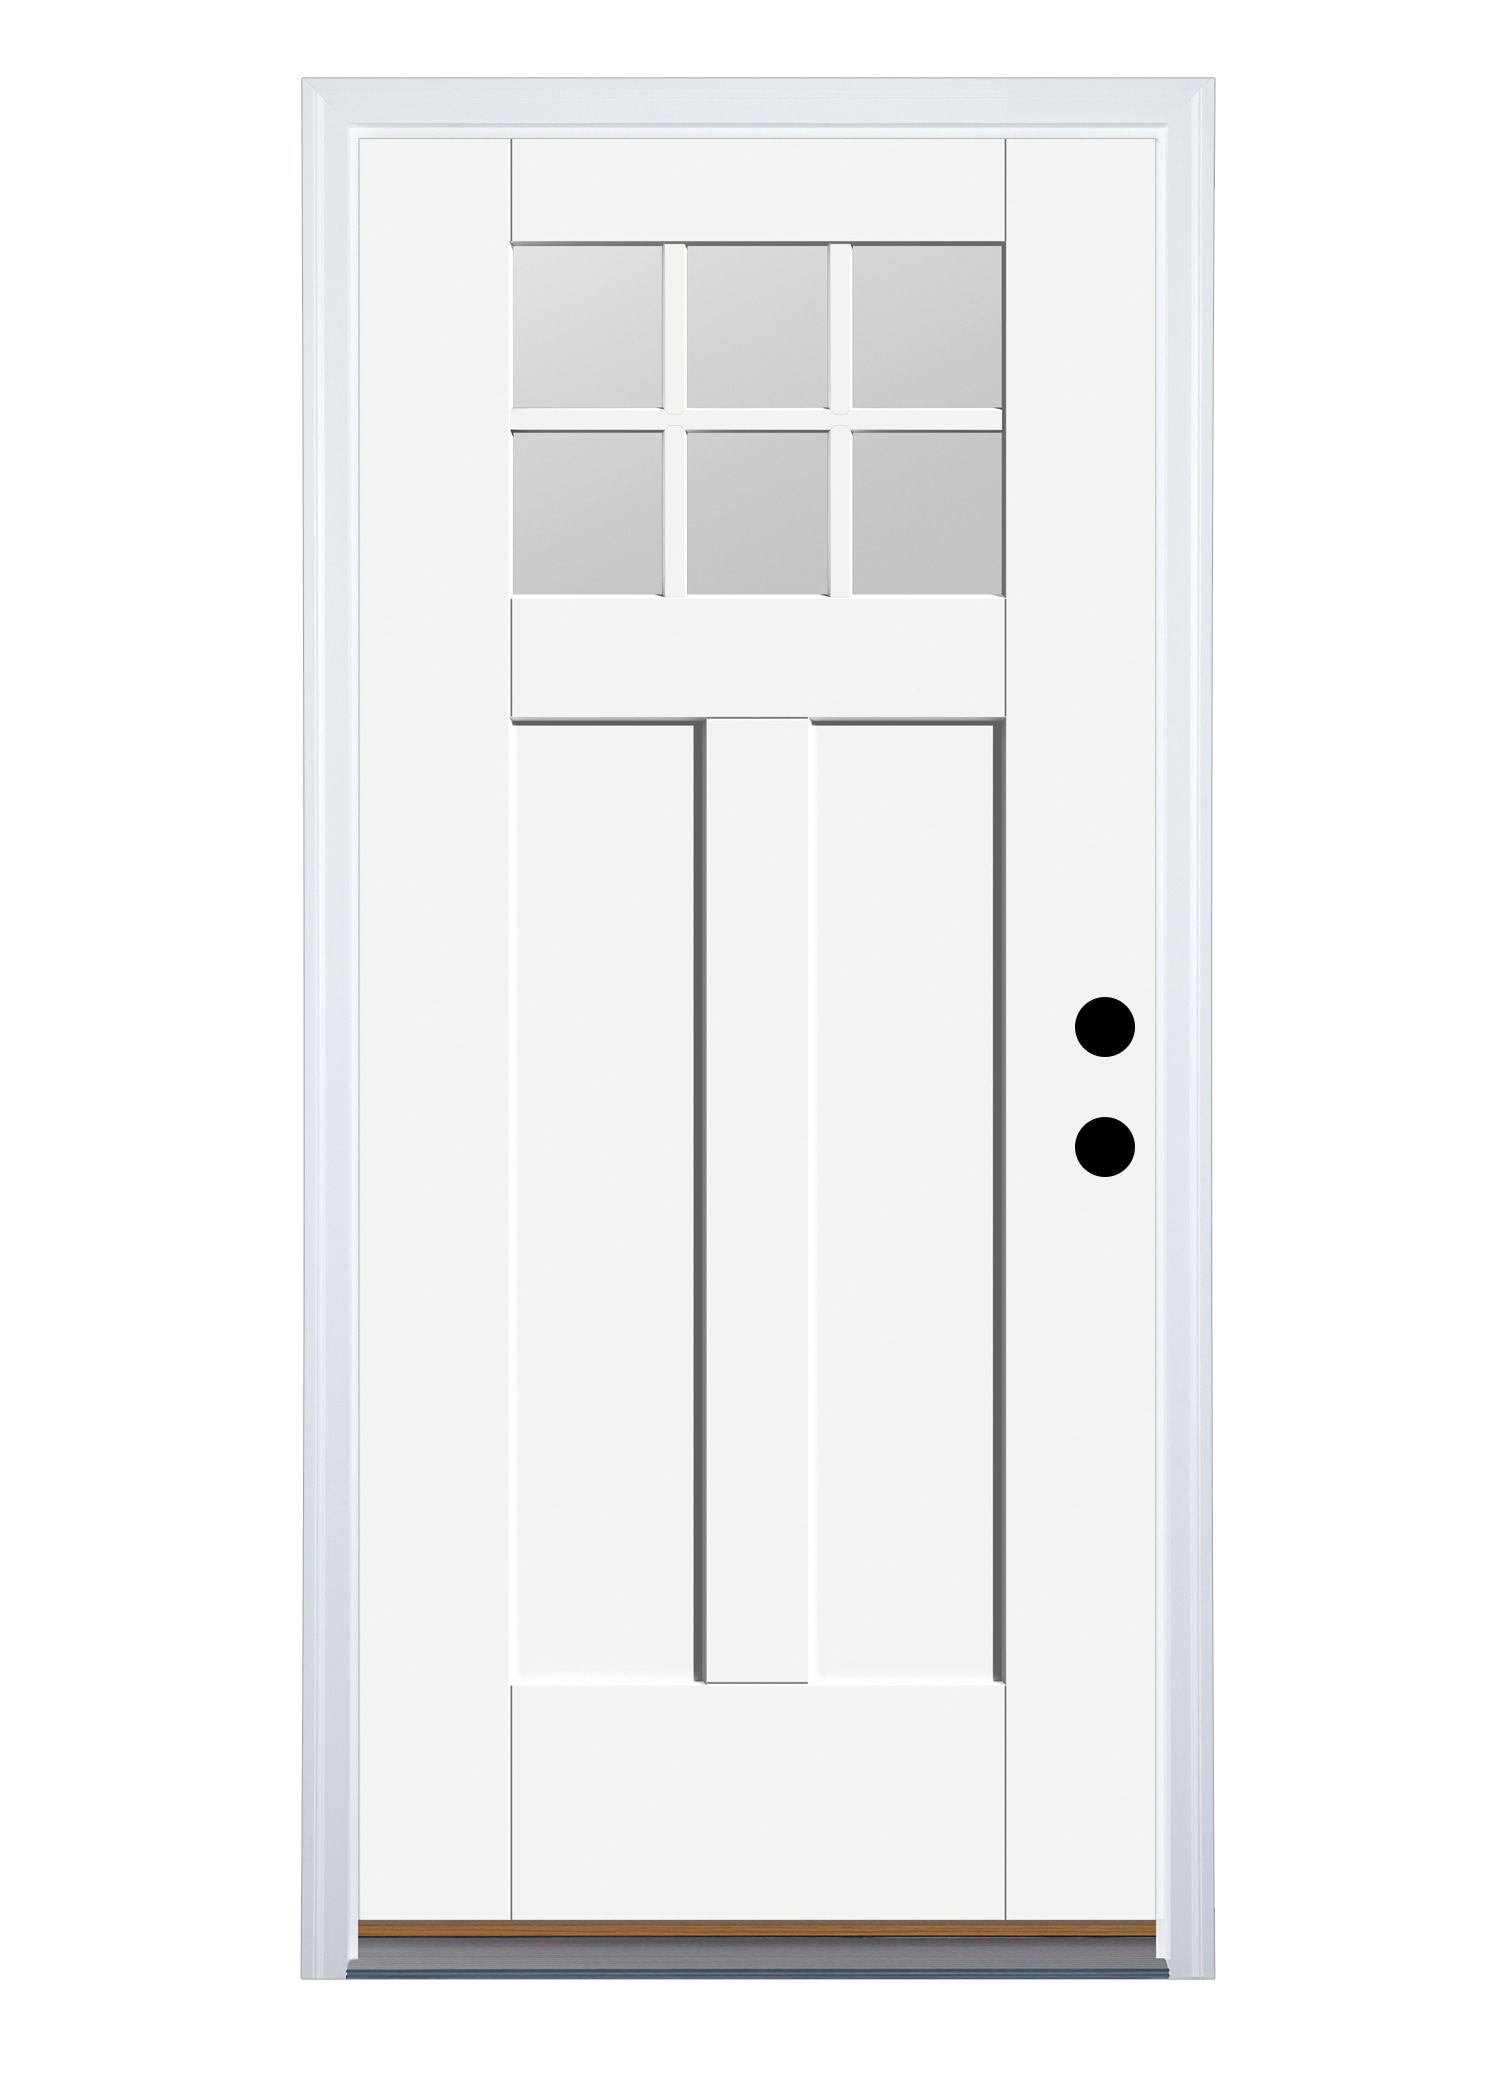 Therma-Tru Benchmark Doors 36-in x 80-in Fiberglass Craftsman Left-Hand Inswing Ready To Paint Unfinished Prehung Single Front Door with Brickmould Insulating Core on Sale At Lowe's